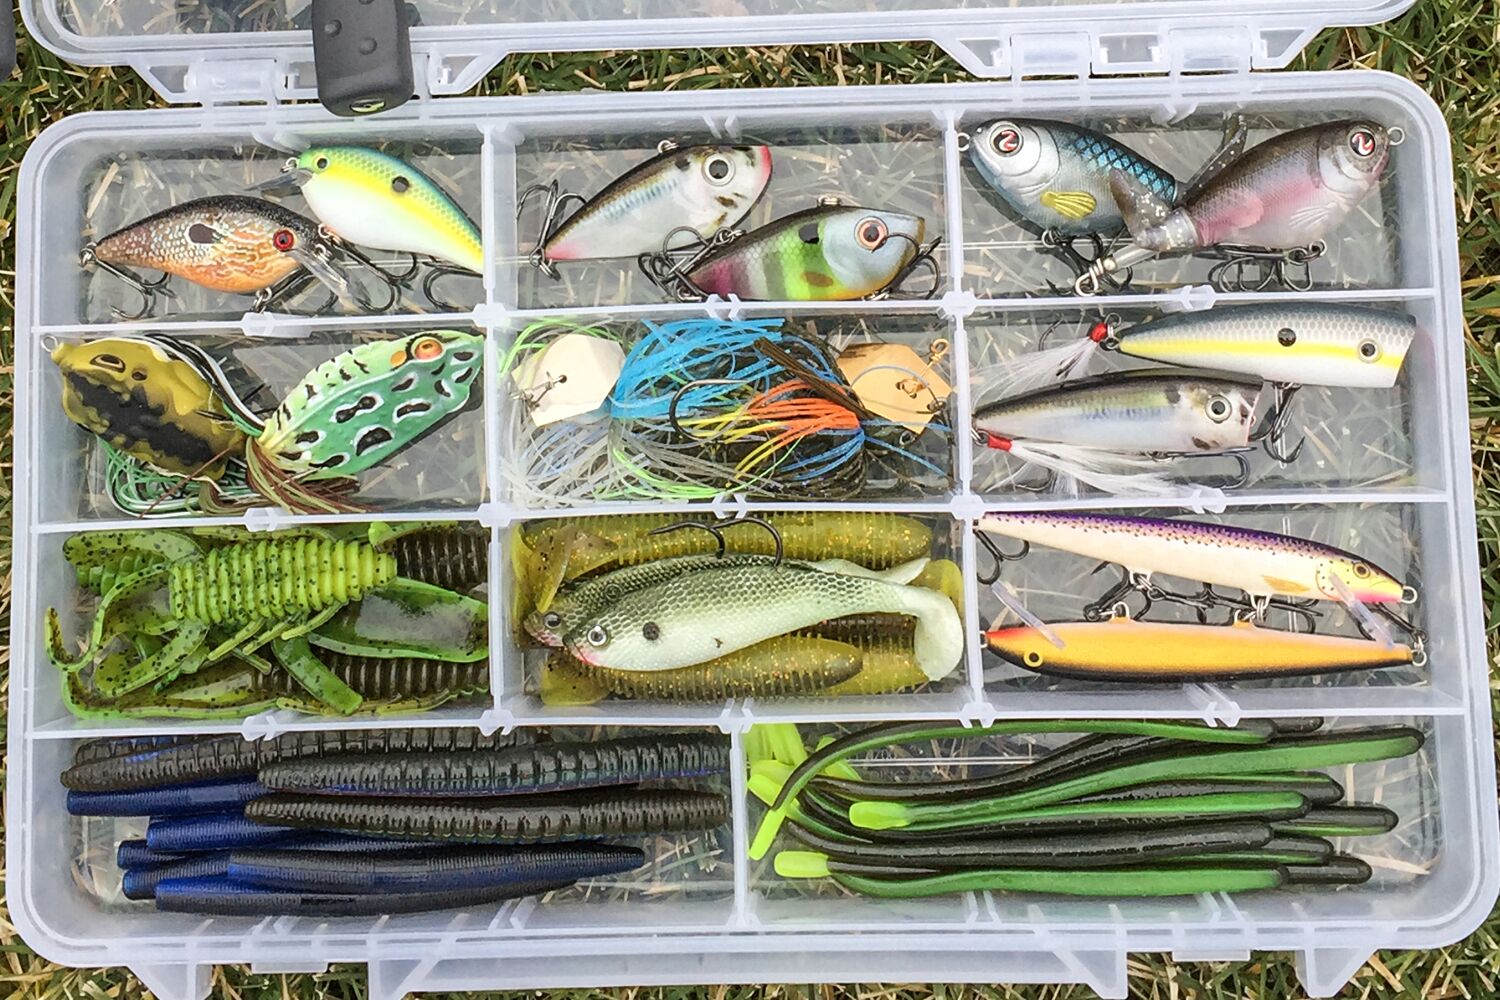 tackle organizer with various fake fishing lures and baits